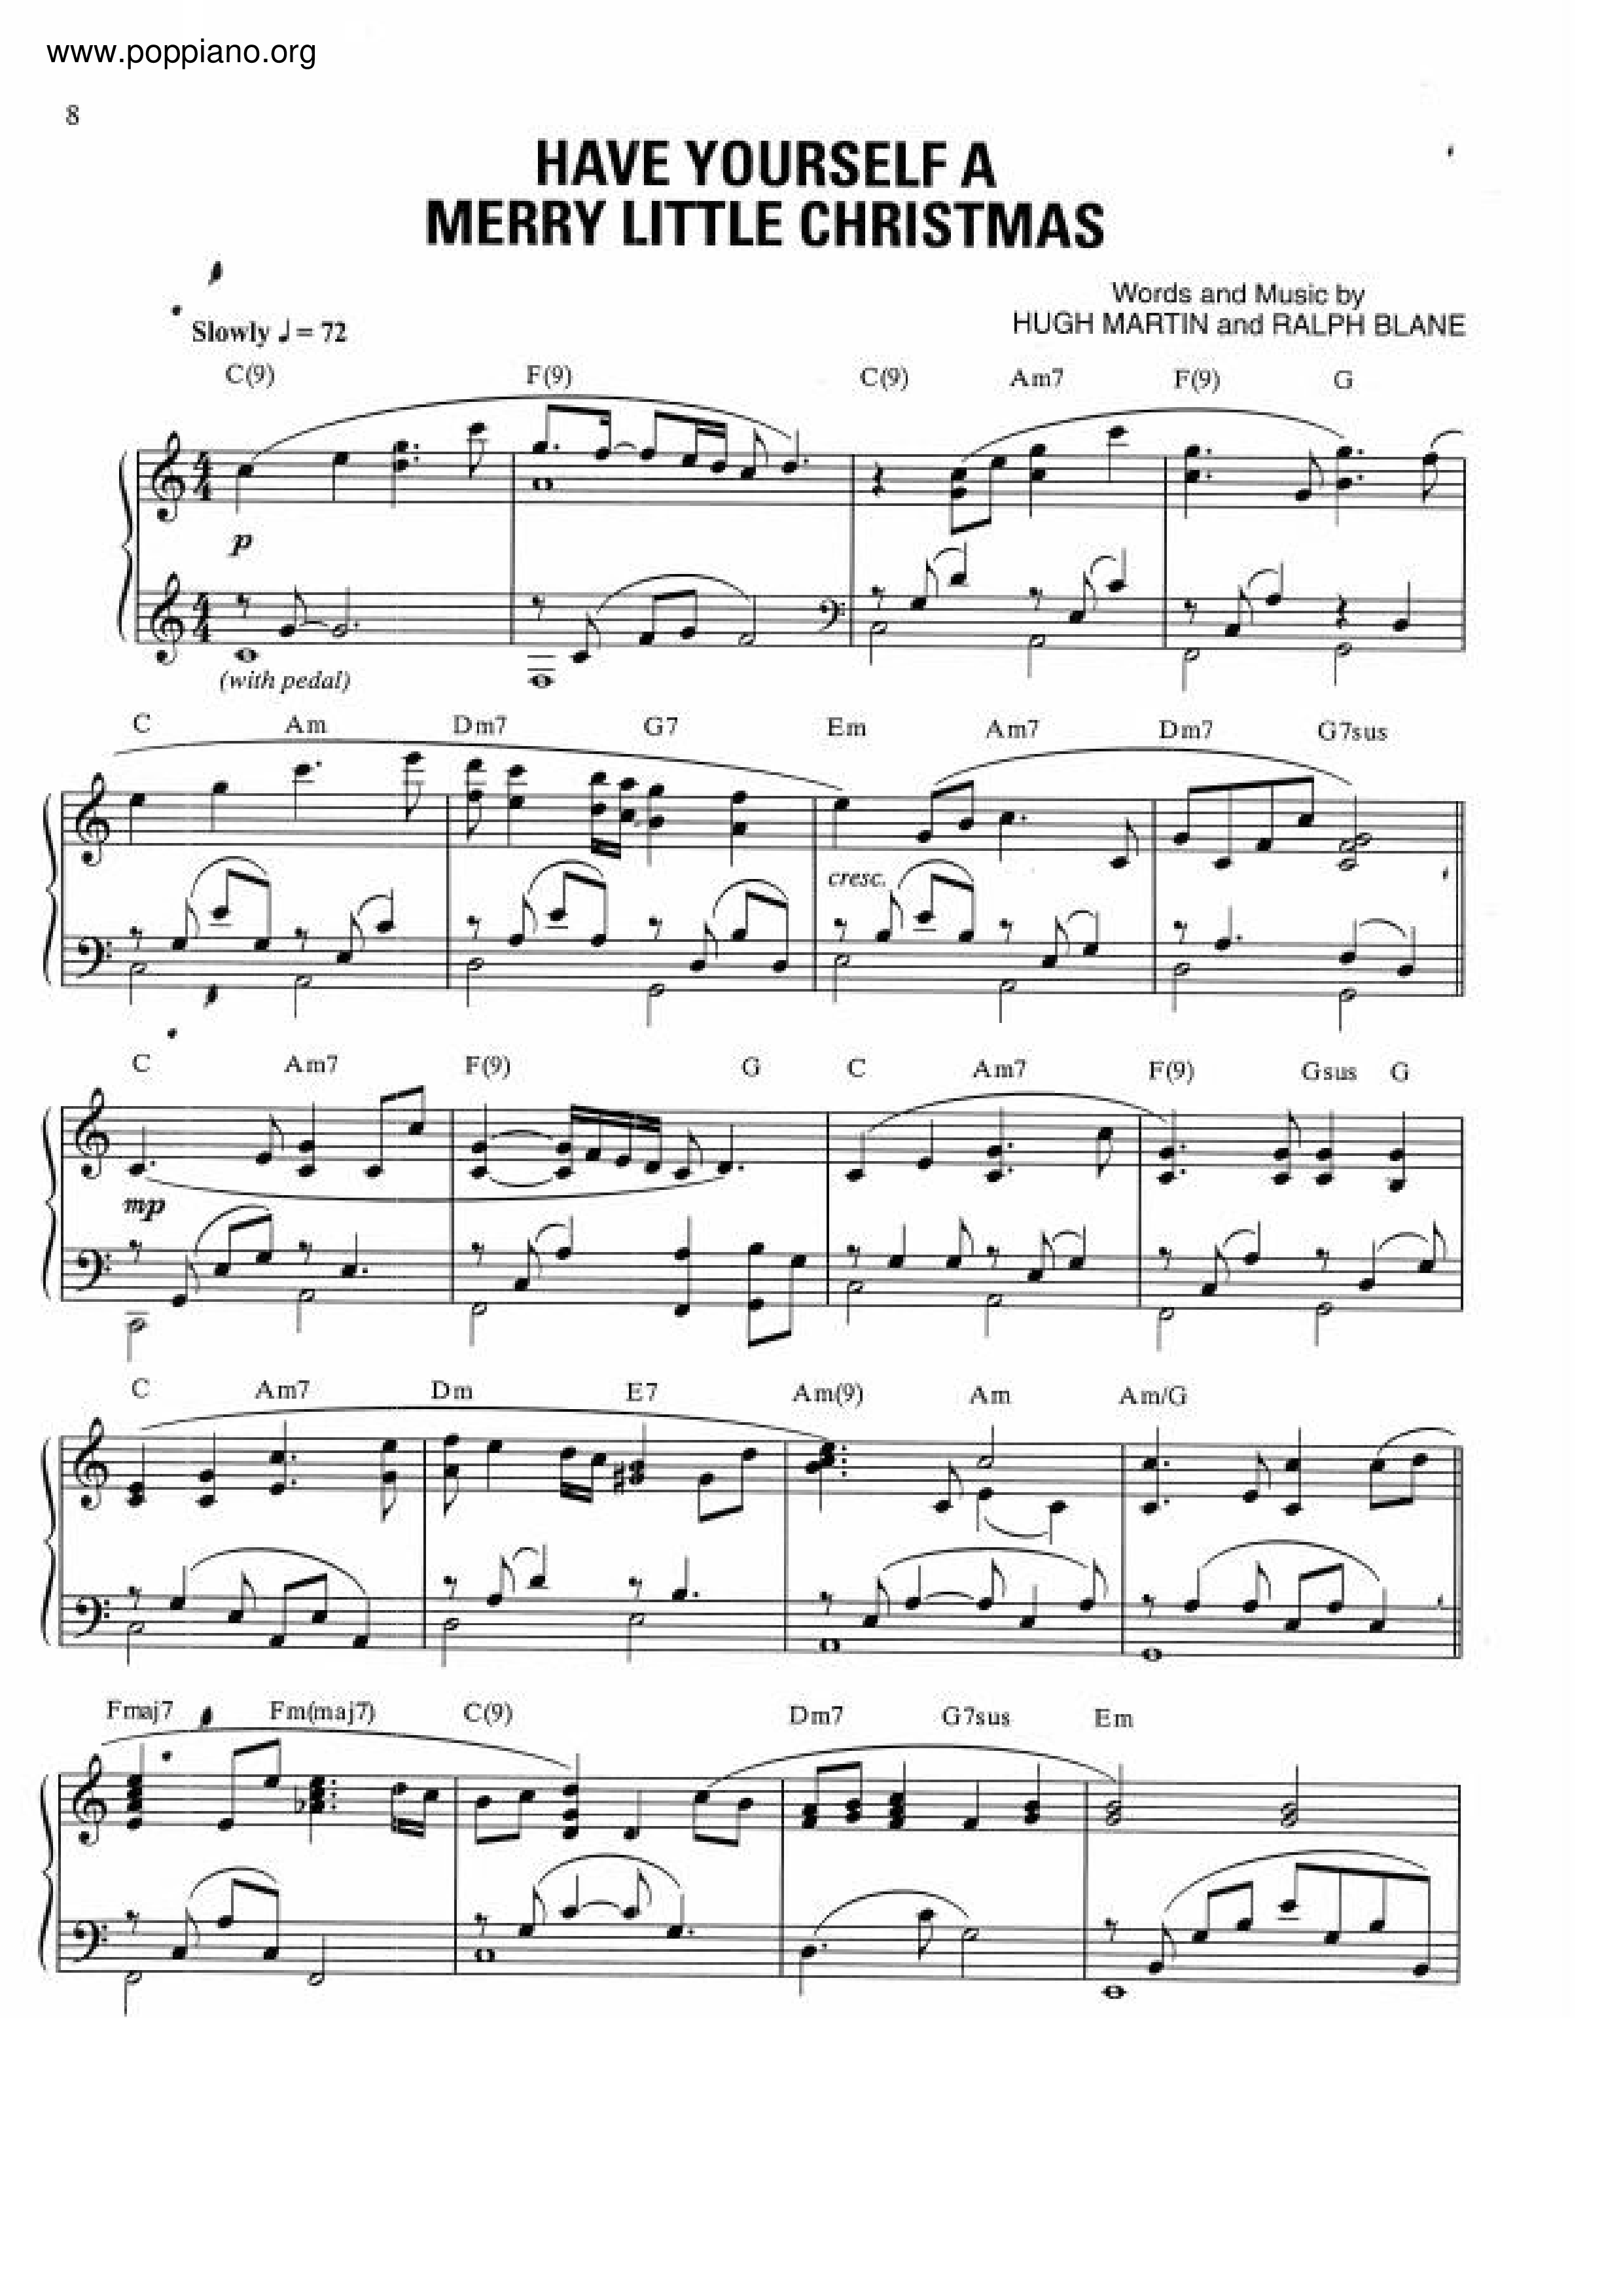 easy-christmas-piano-sheet-music-offers-discount-save-68-jlcatj-gob-mx